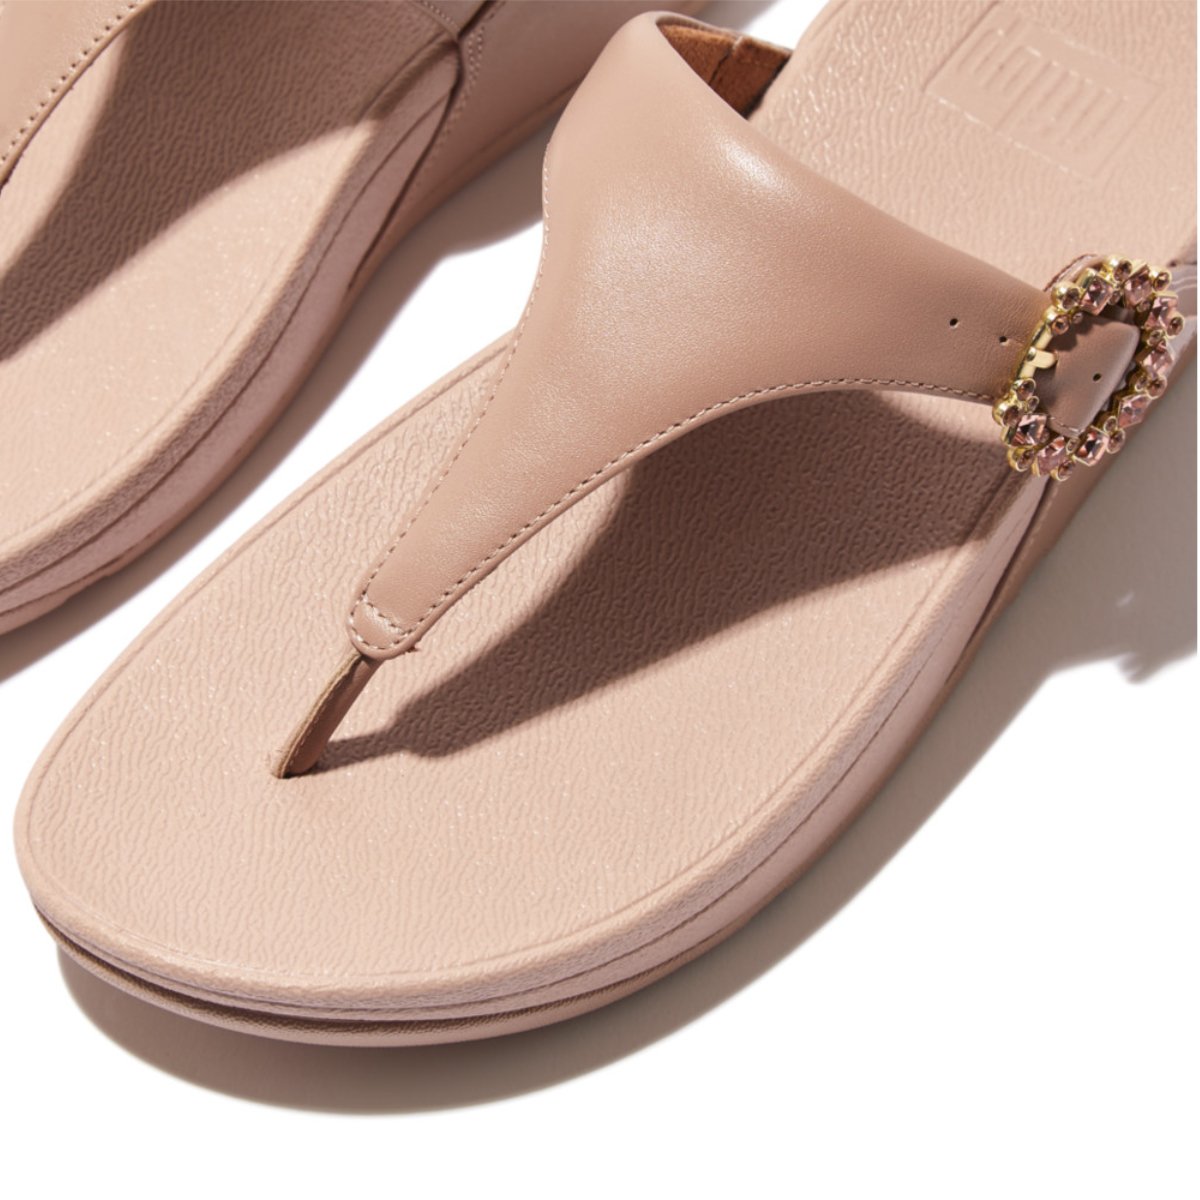 FitFlop LULU Crystal-Buckle Leather Toe-Post Sandals Beige close up